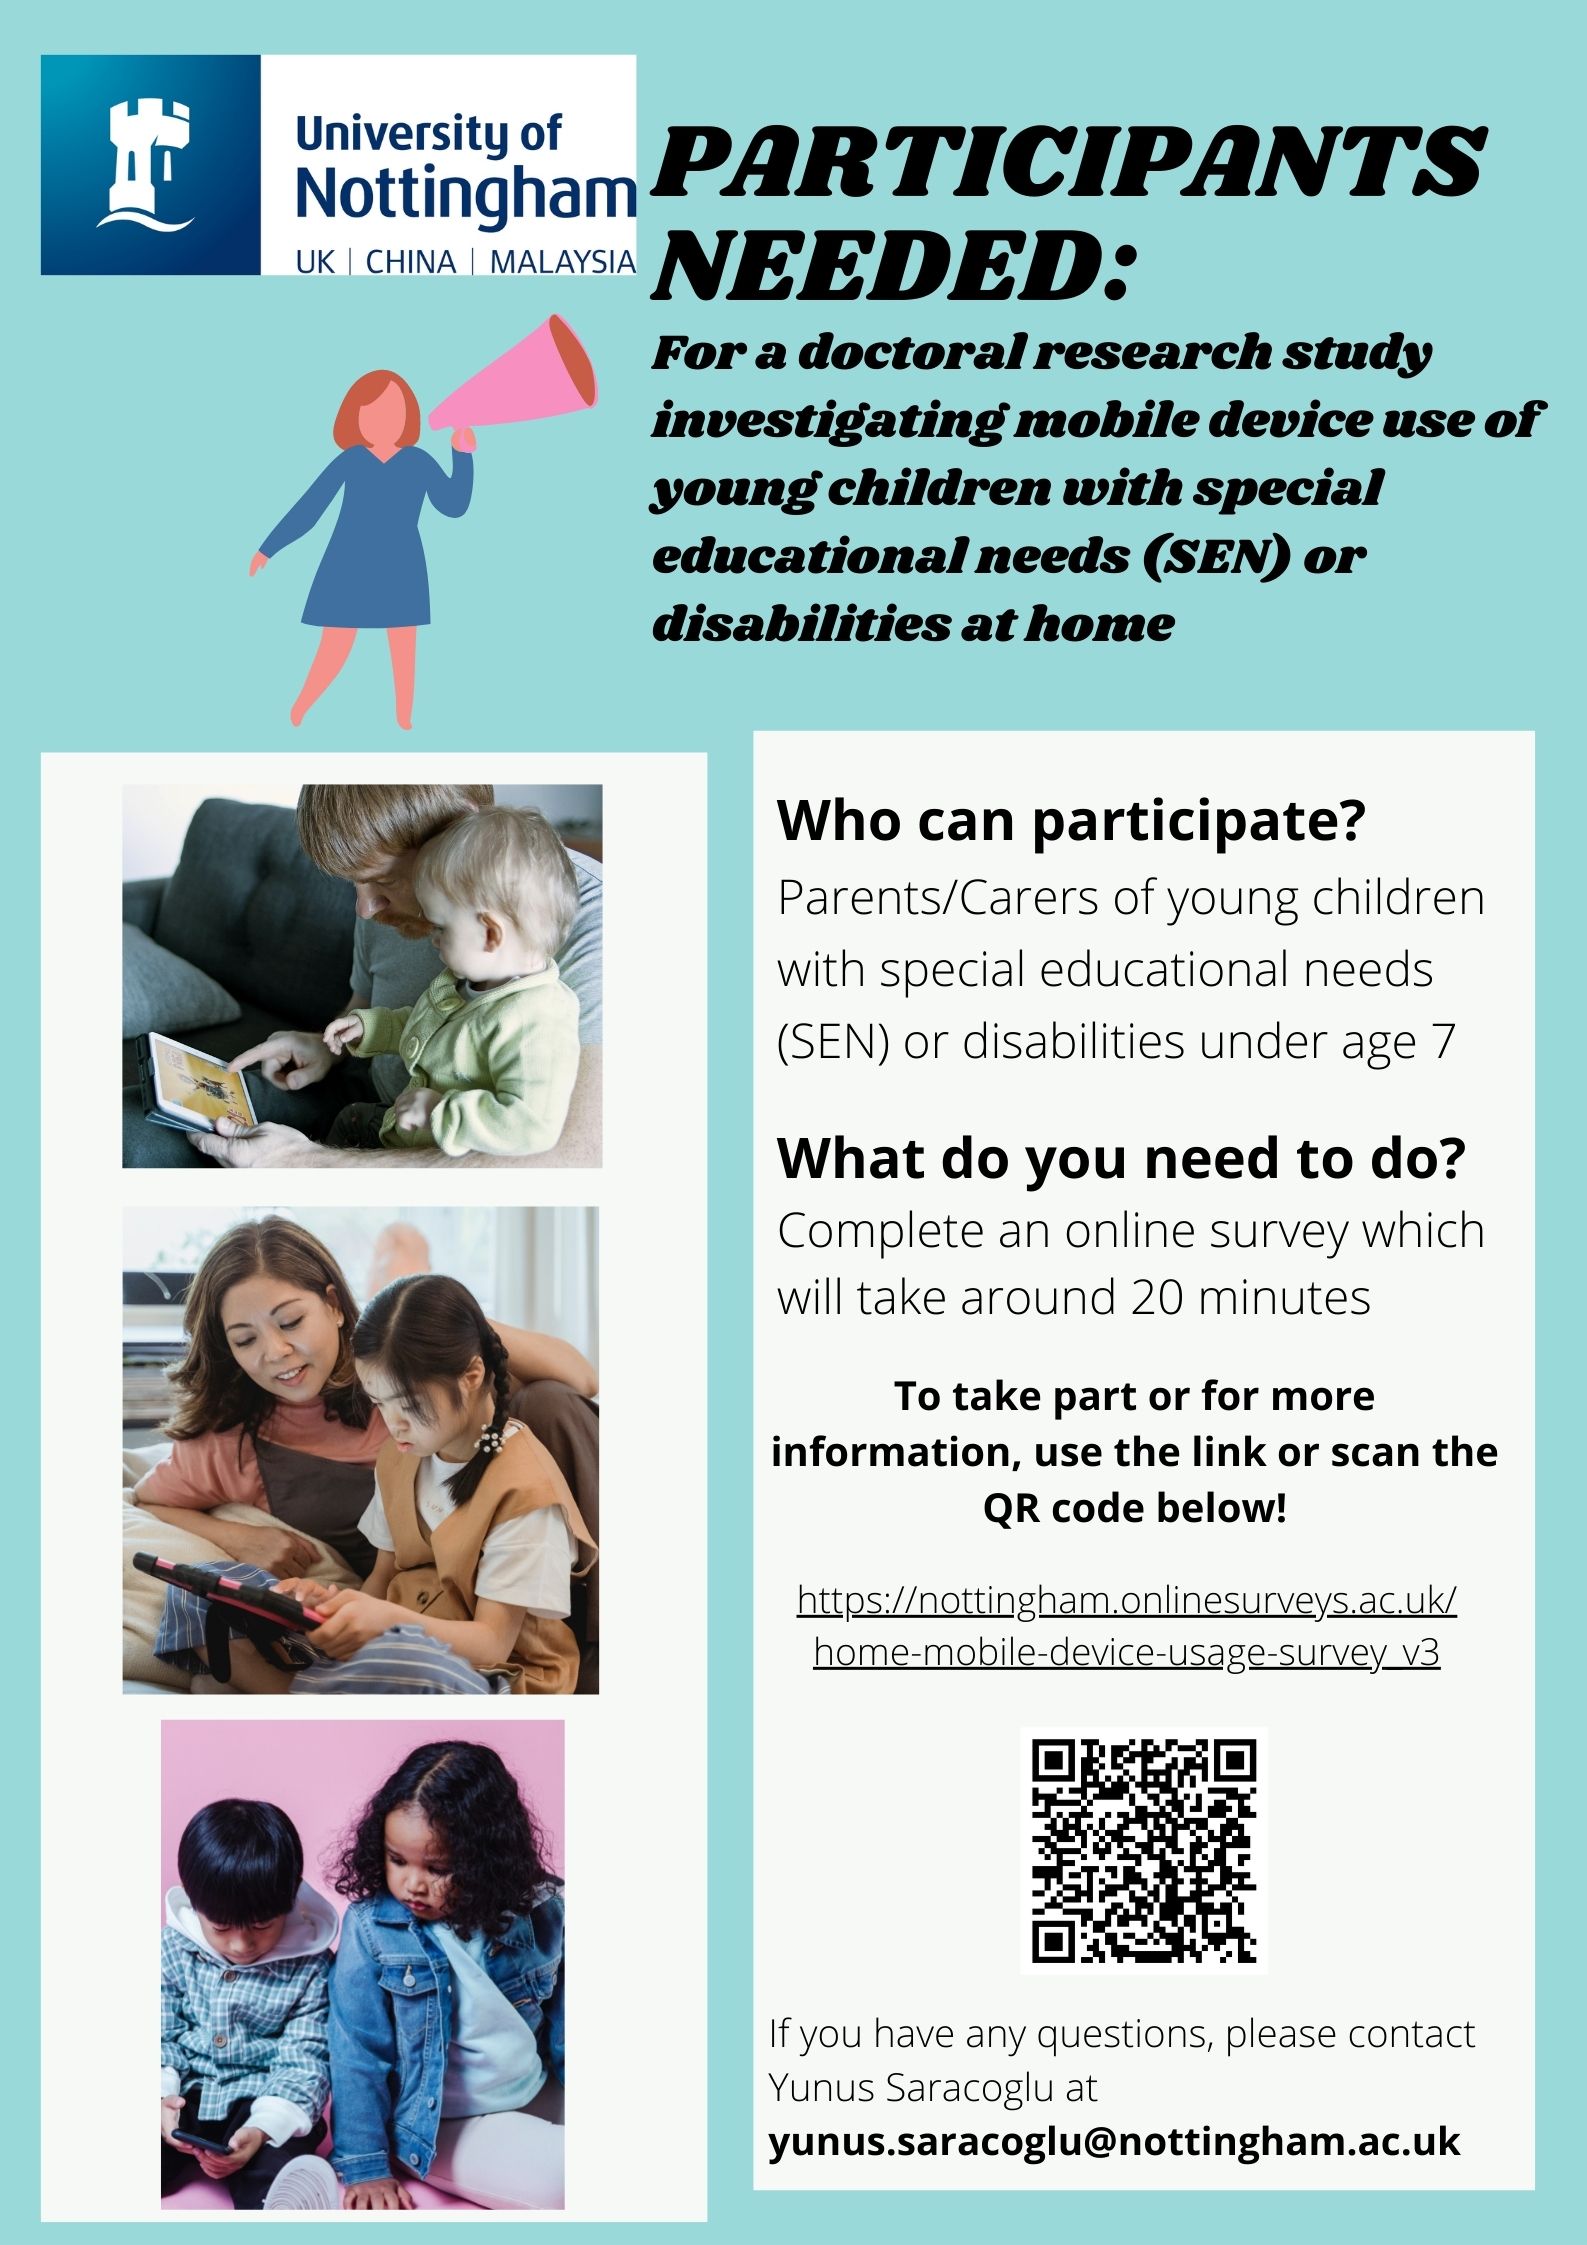 Participants needed for a doctoral research study investigating mobile device use of young children with special educational needs (SEN) or disabilities at home. Who can participate? Parents/carers of young children with SEN or disabilities under age 7. What do you need to do? Complete an online survey which should take around 20 minutes.